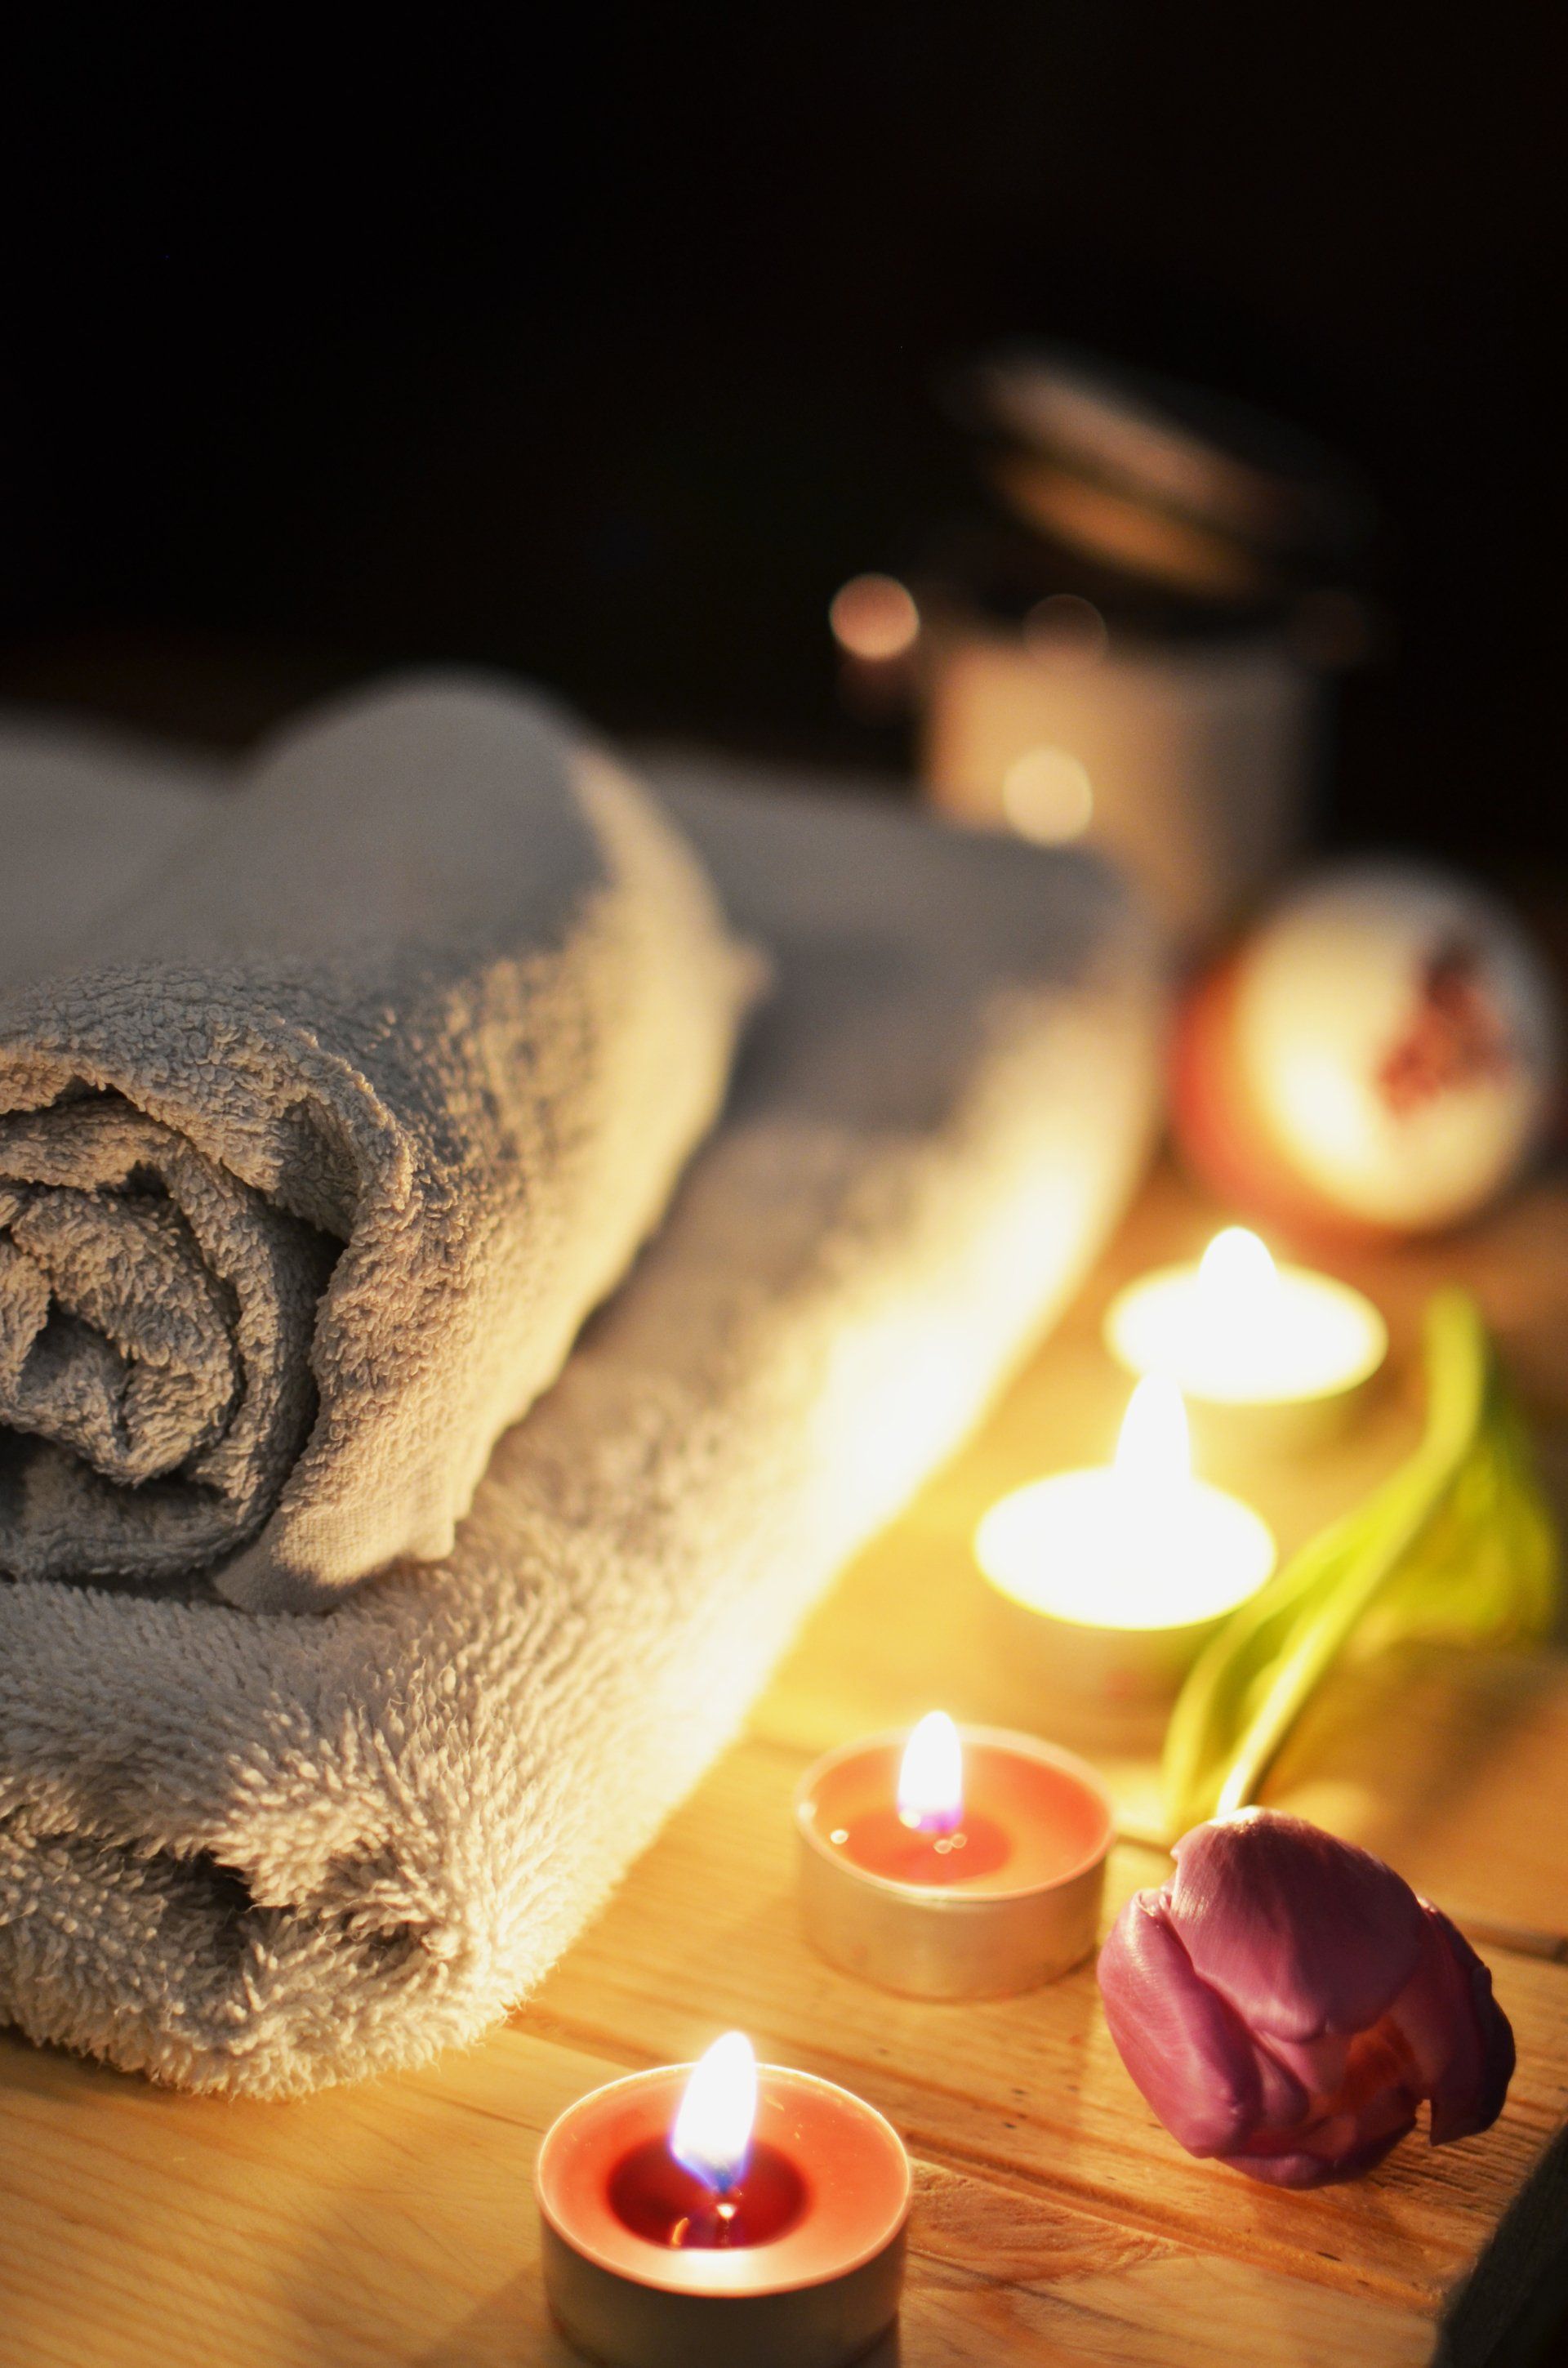 Relaxing Spa Scents to diffuse in home or business